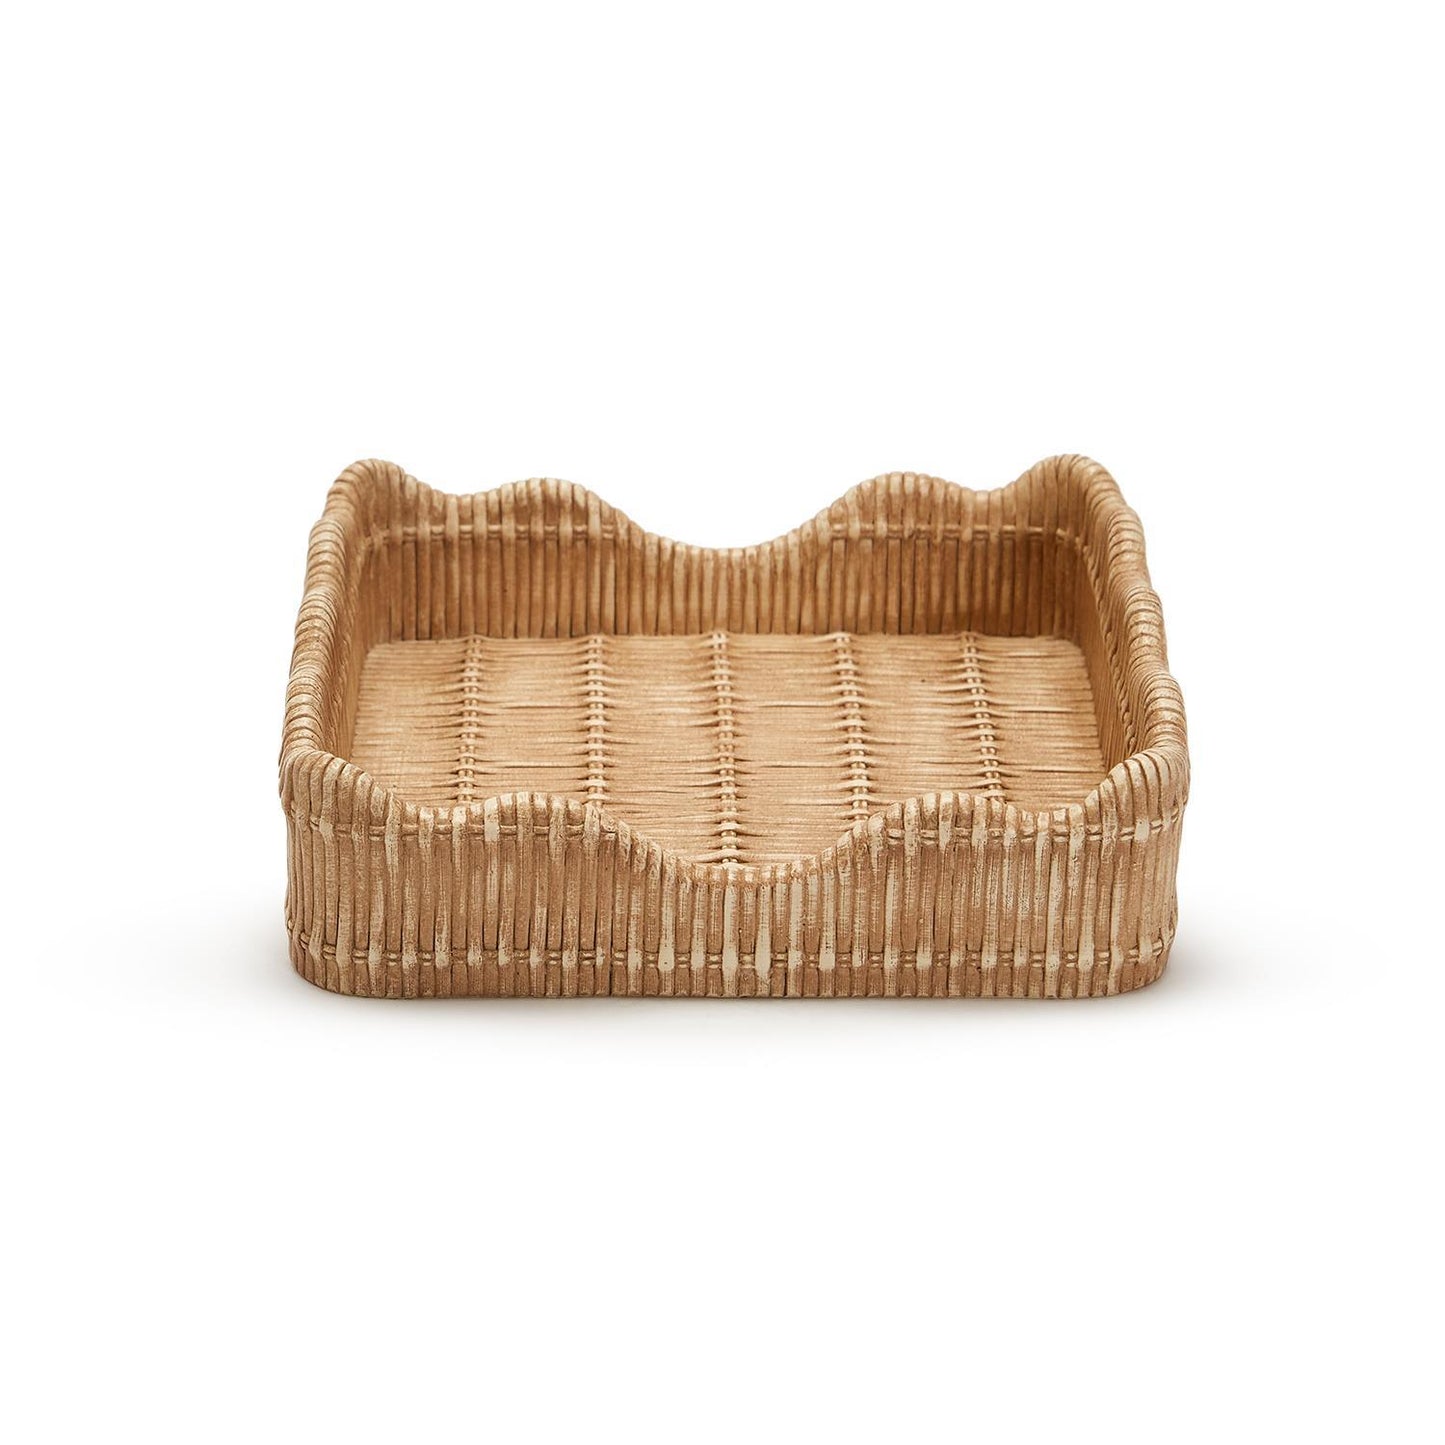 Basket Weave Pattern Scalloped Edge Napkin Holder - Curated Home Decor